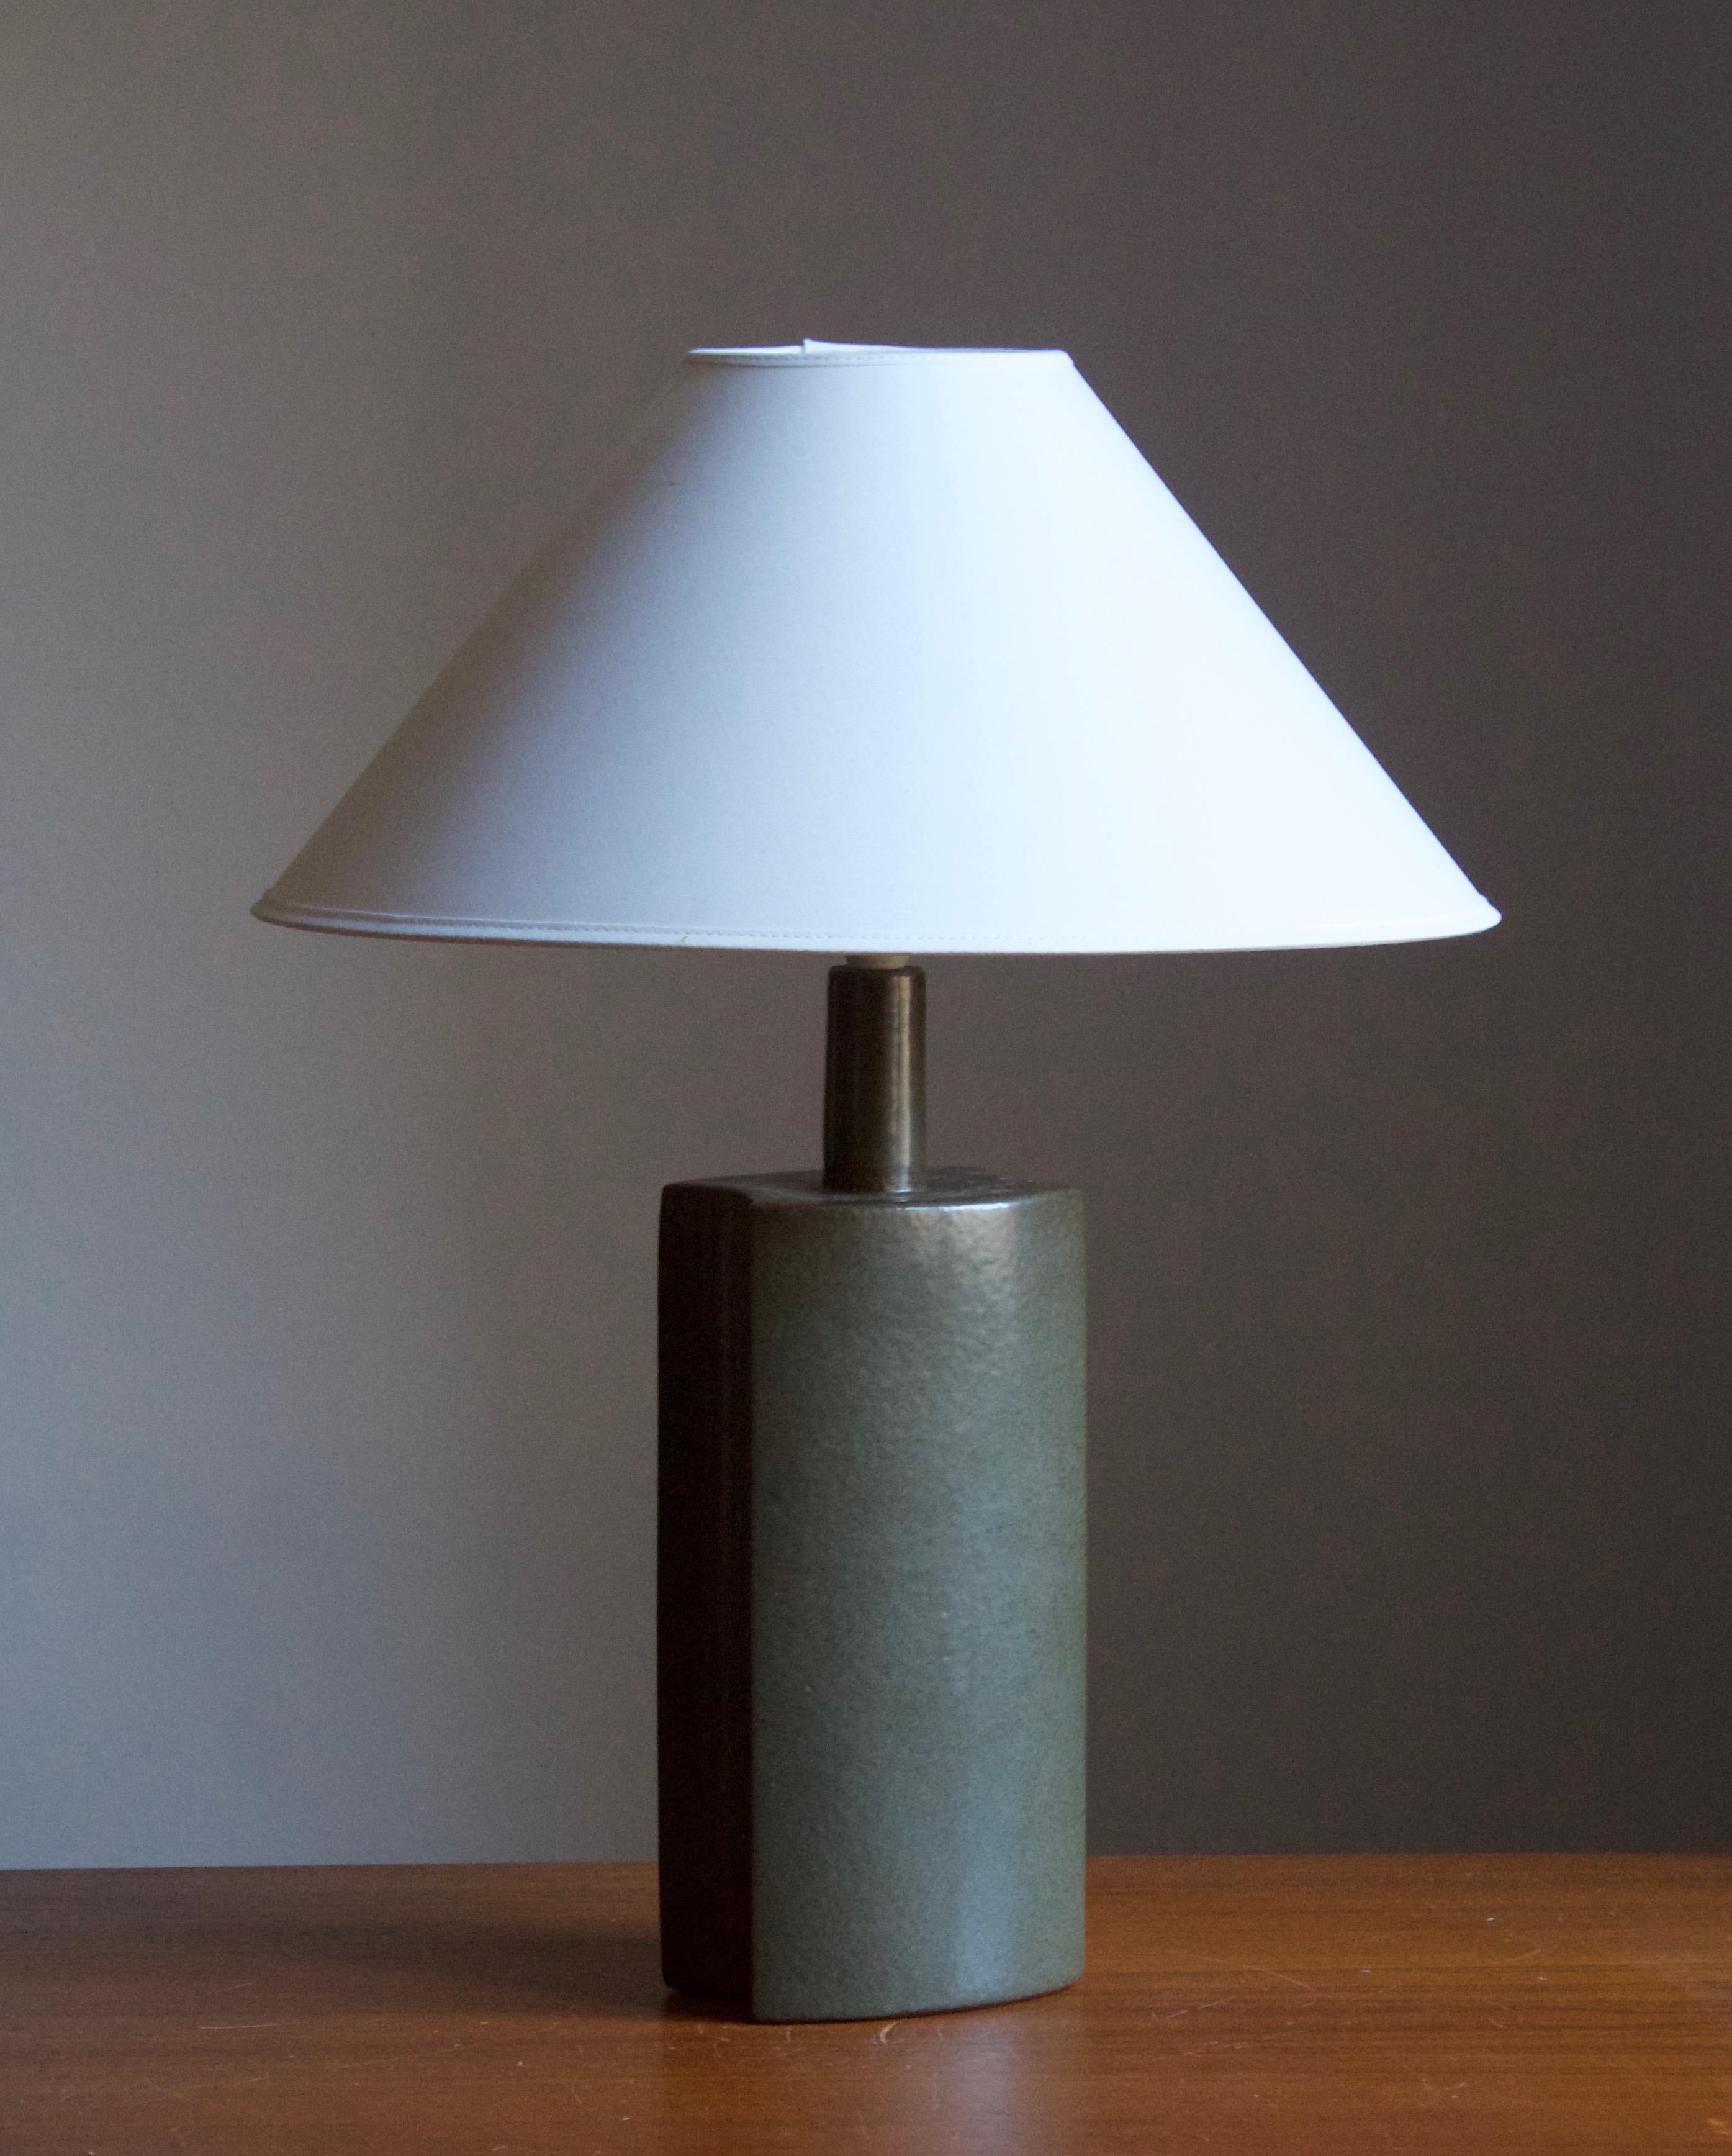 A table / desk lamp designed by husband and wife Per & Annelise Linneman-Schmidt. Handcast in stoneware, green glaze. Produced in their own Studio, named Palshus, in Sengeløse, Denmark. Signed.

Sold without lampshade. Stated dimensions exclude